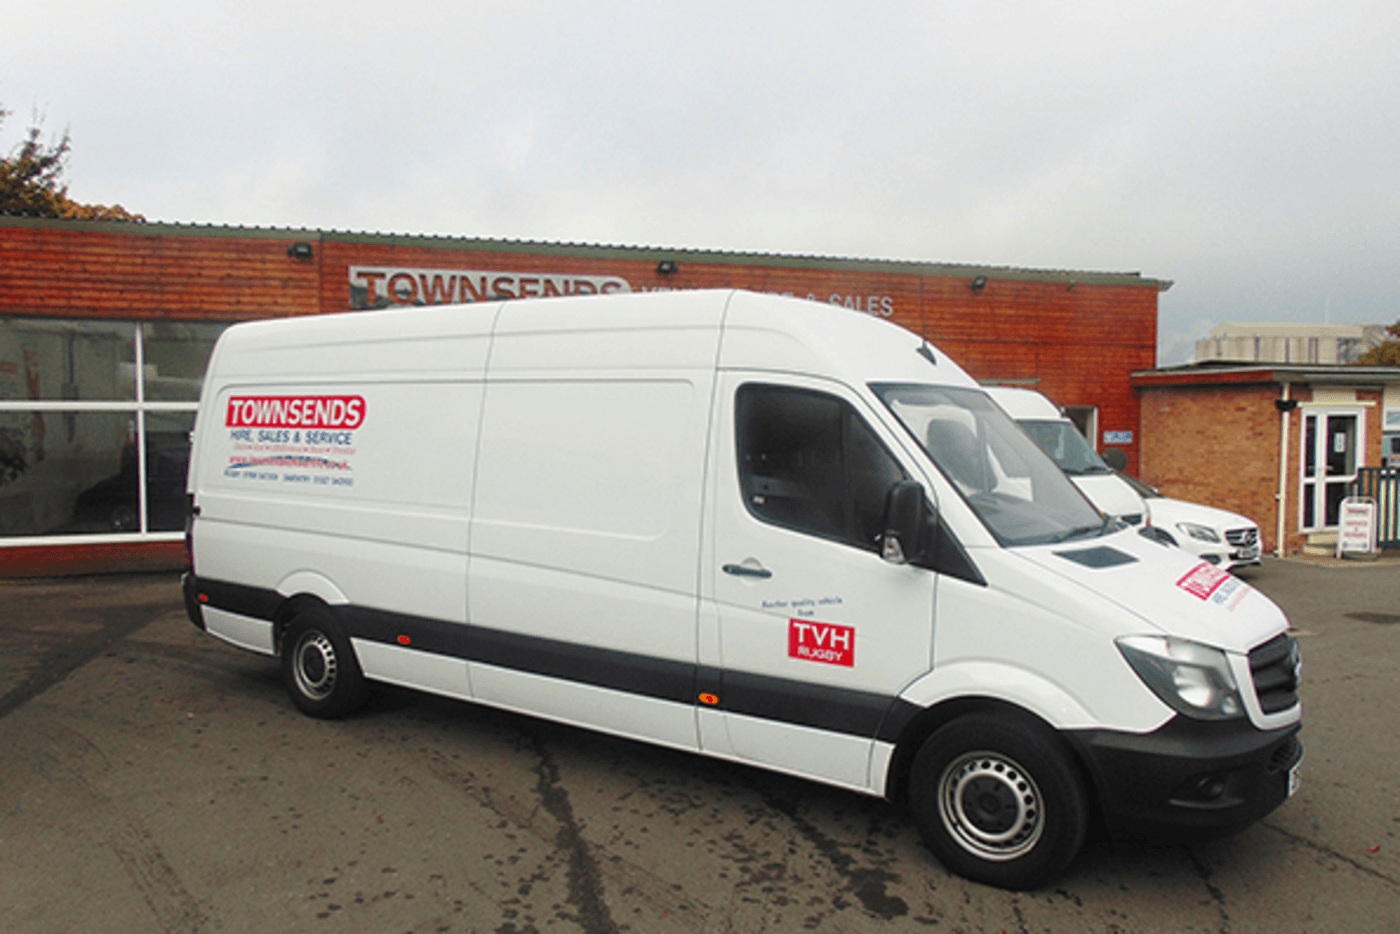 Rugby self-store in partnership with Townsend vehicle hire | Self ...